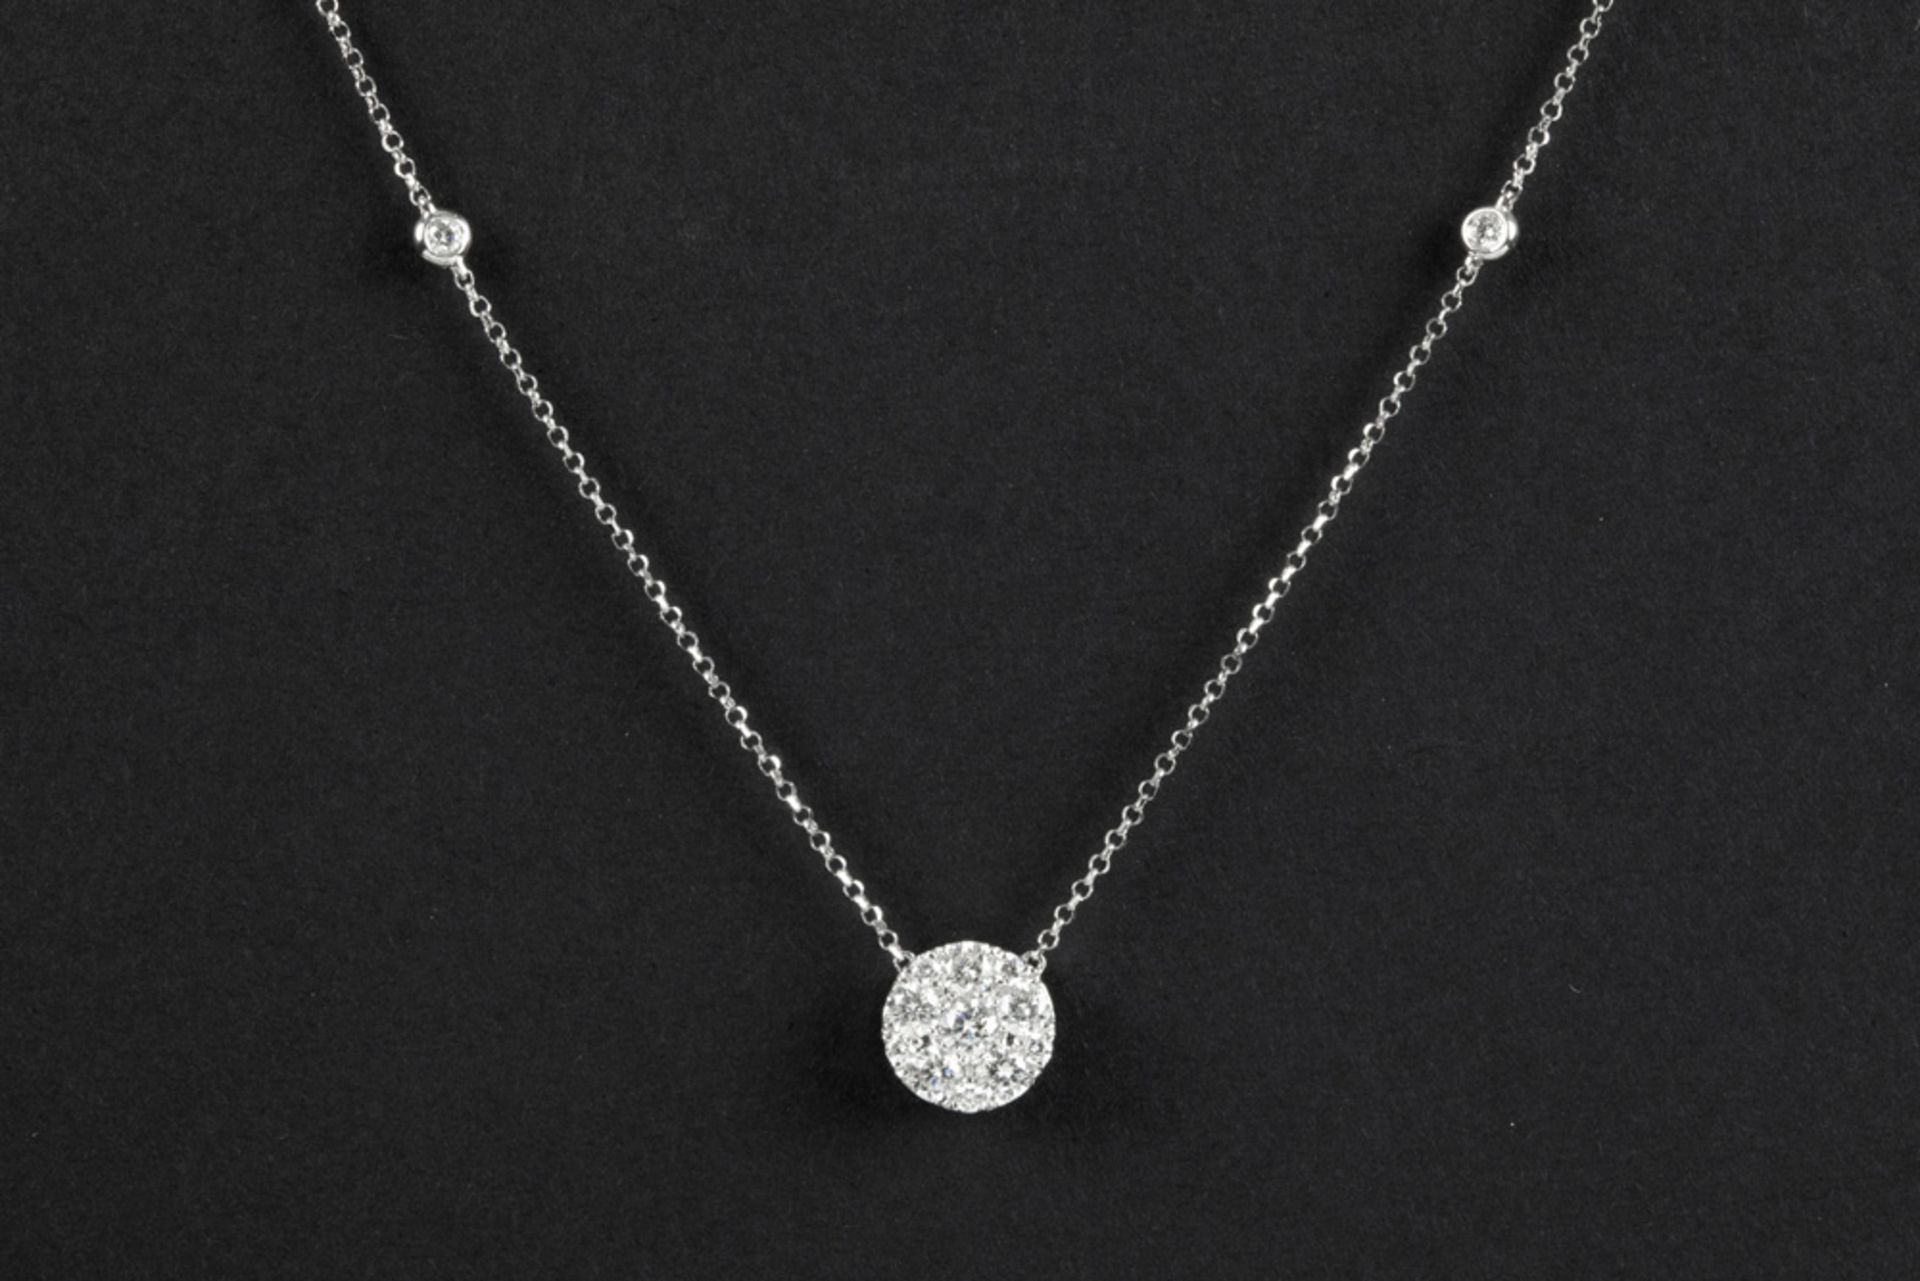 round pendant in white gold (18 carat) with ca 0,50 carat of high quality brilliant cut diamonds -